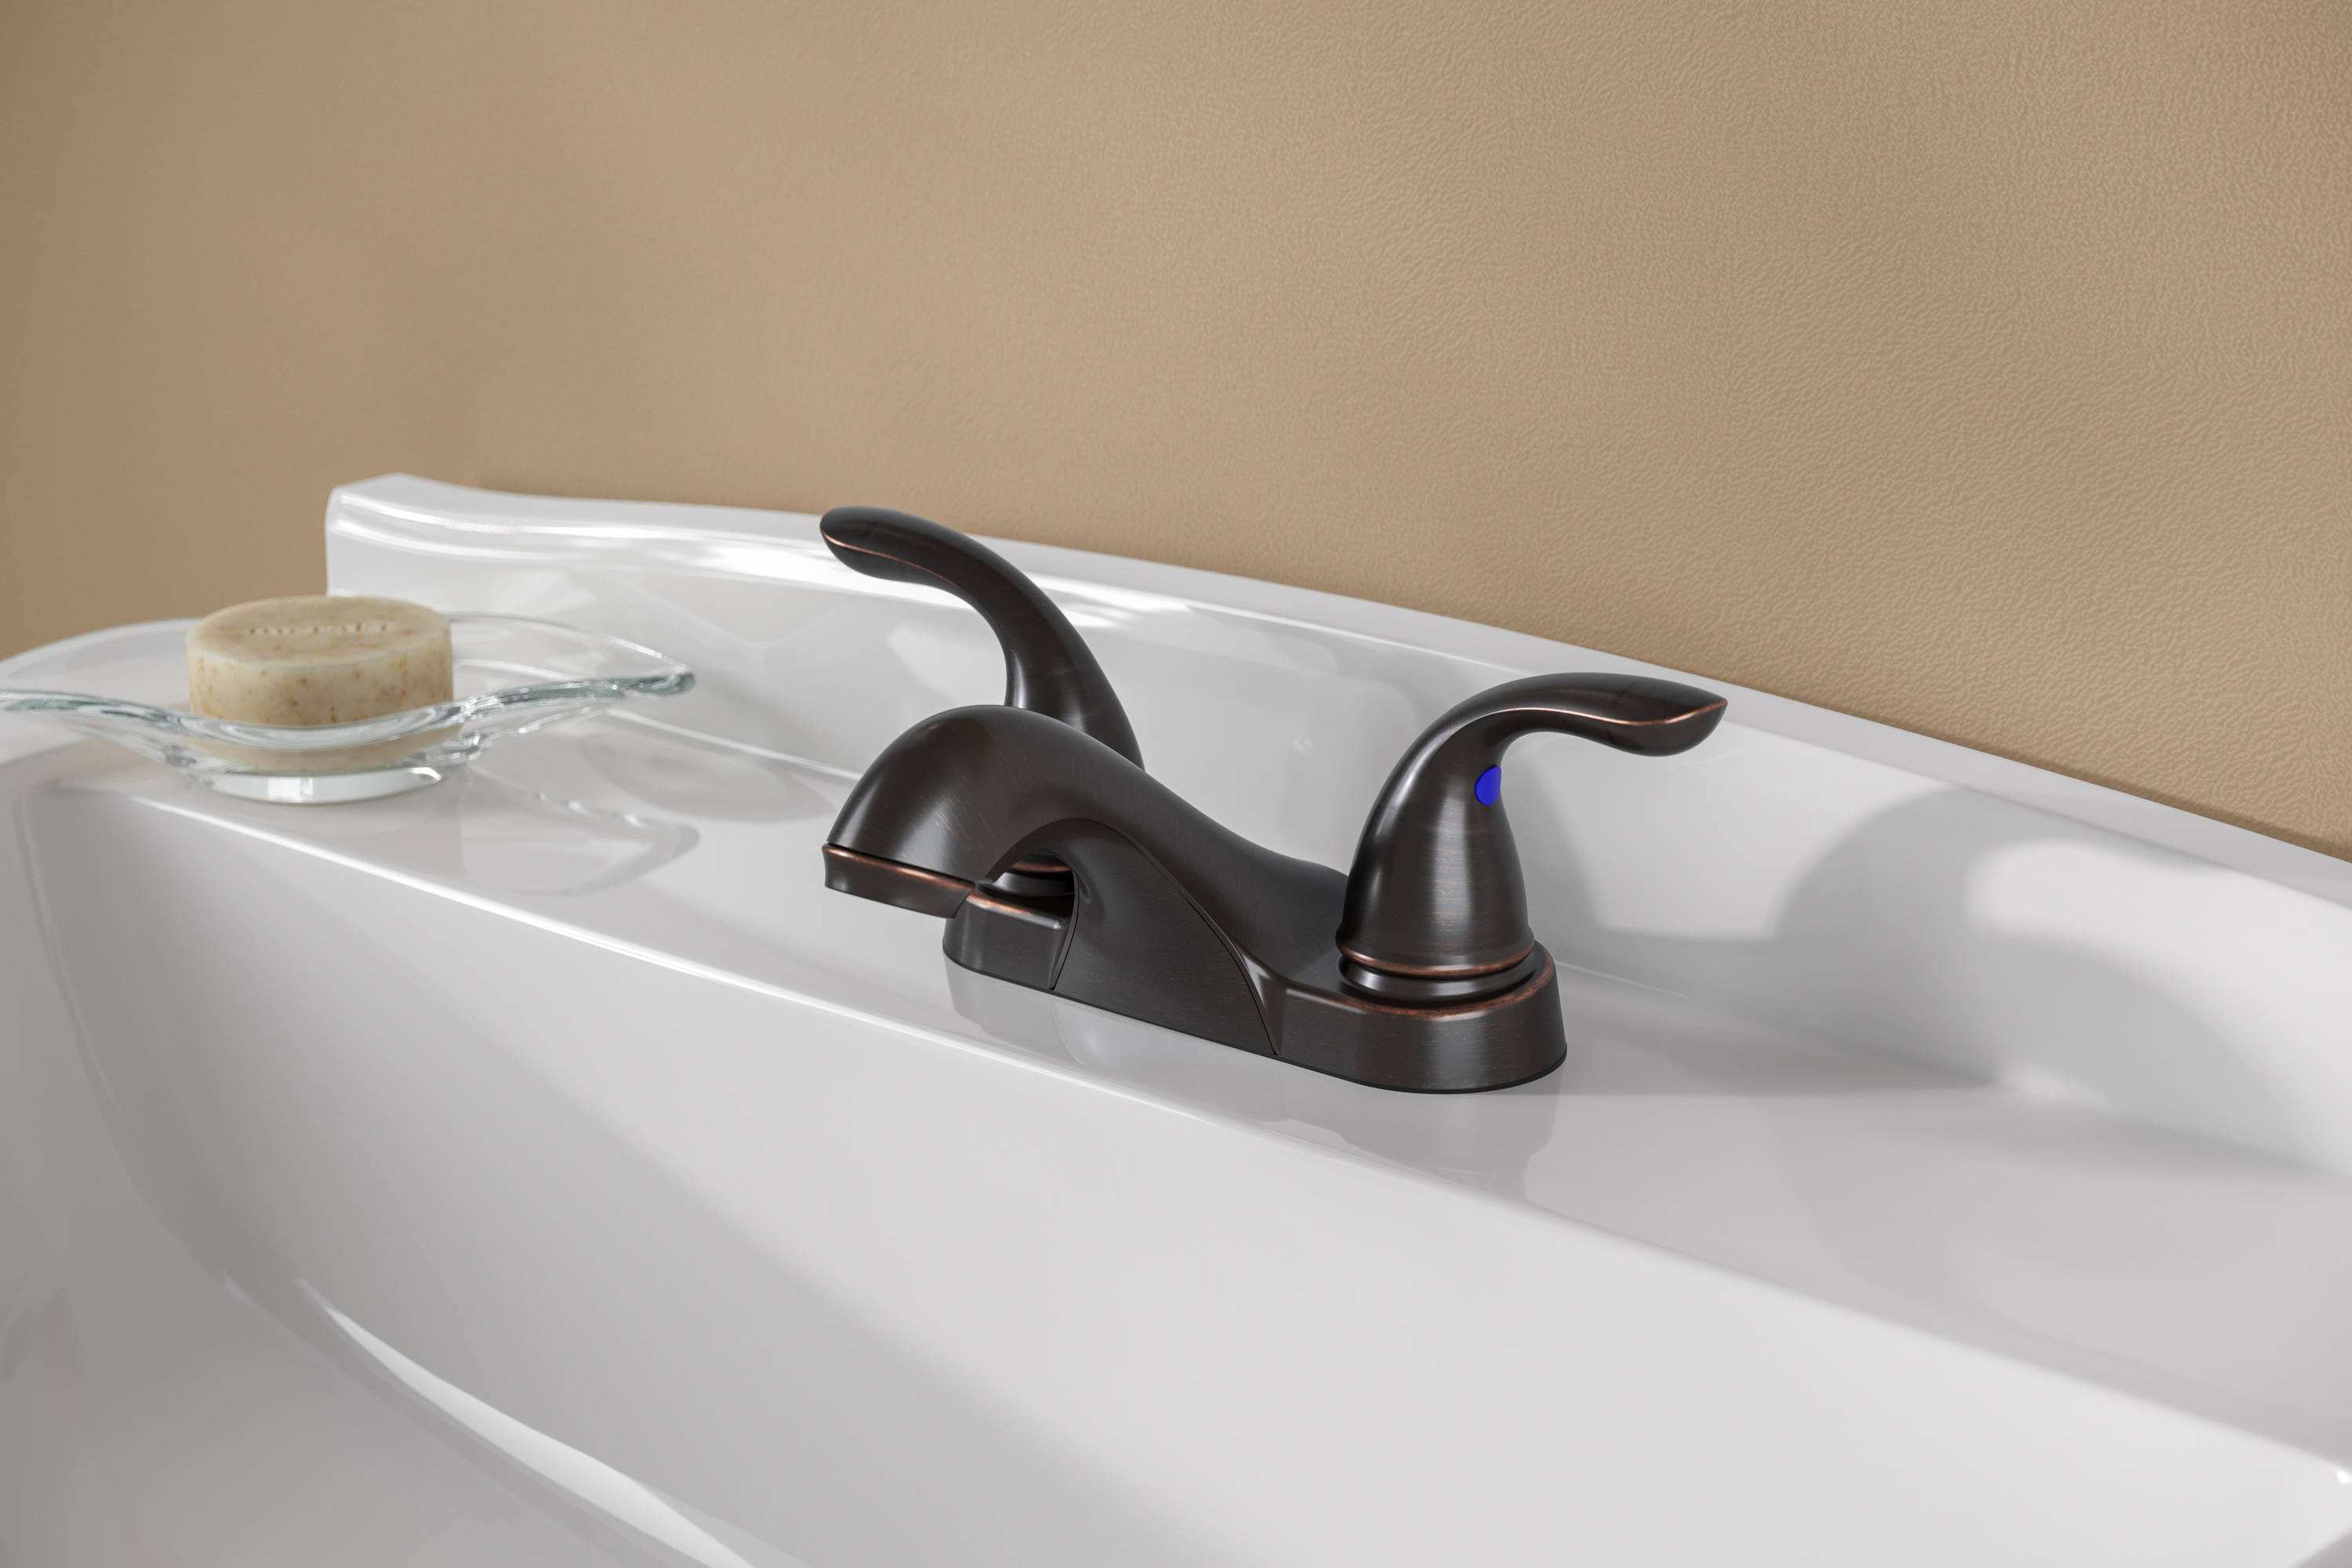 Pfister Pfirst Tuscan Bronze 2-handle 4-in centerset WaterSense Low-arc Bathroom Sink Faucet with Drain